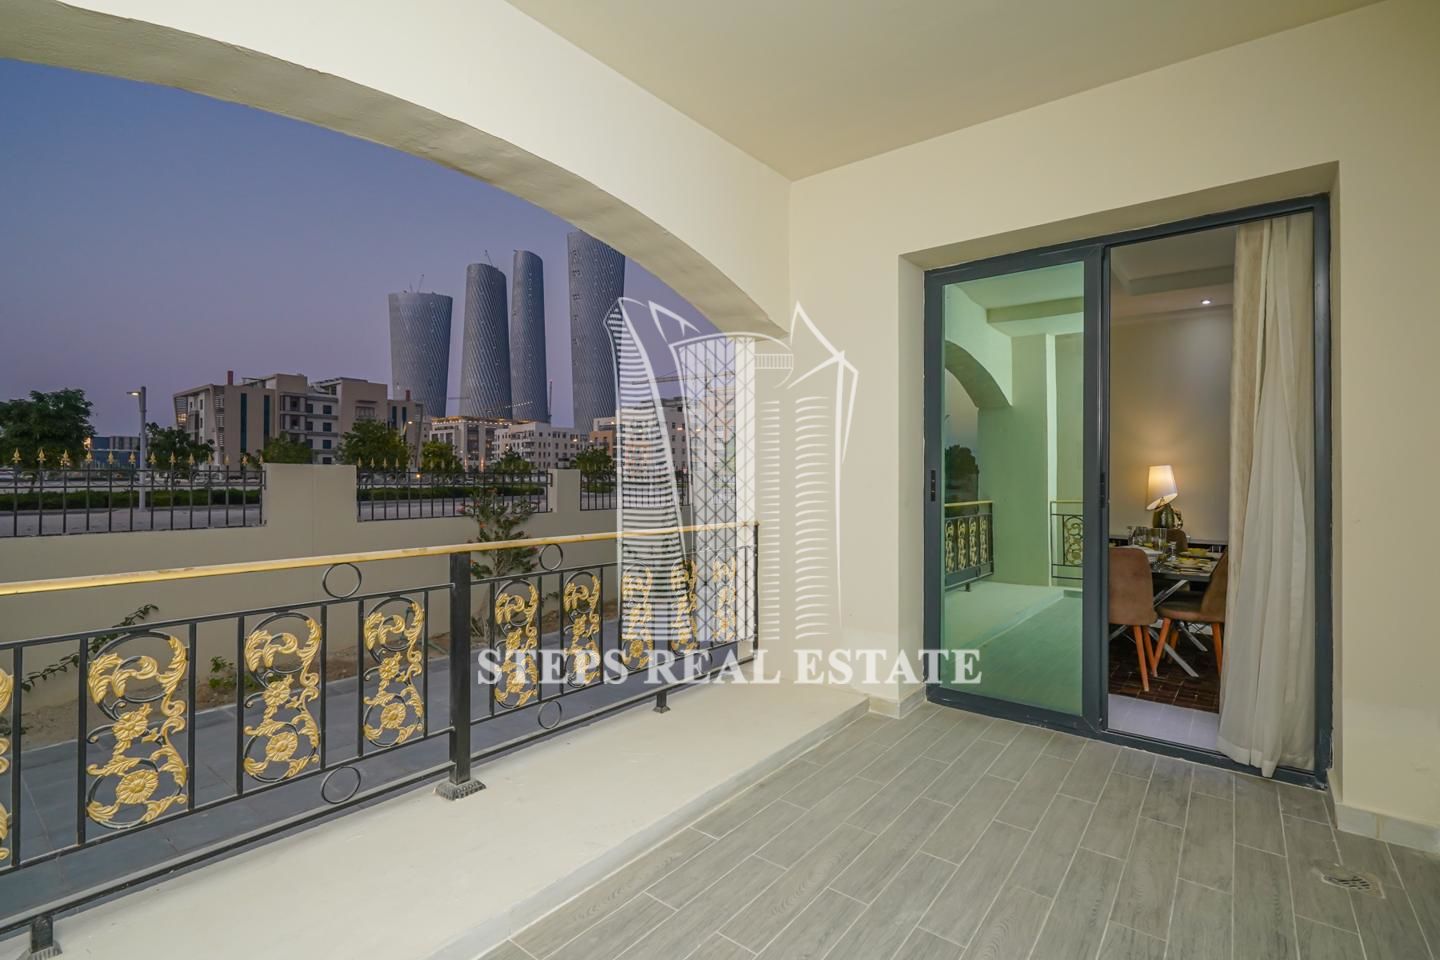 Stunning 1-Bedroom Apartment with Balcony